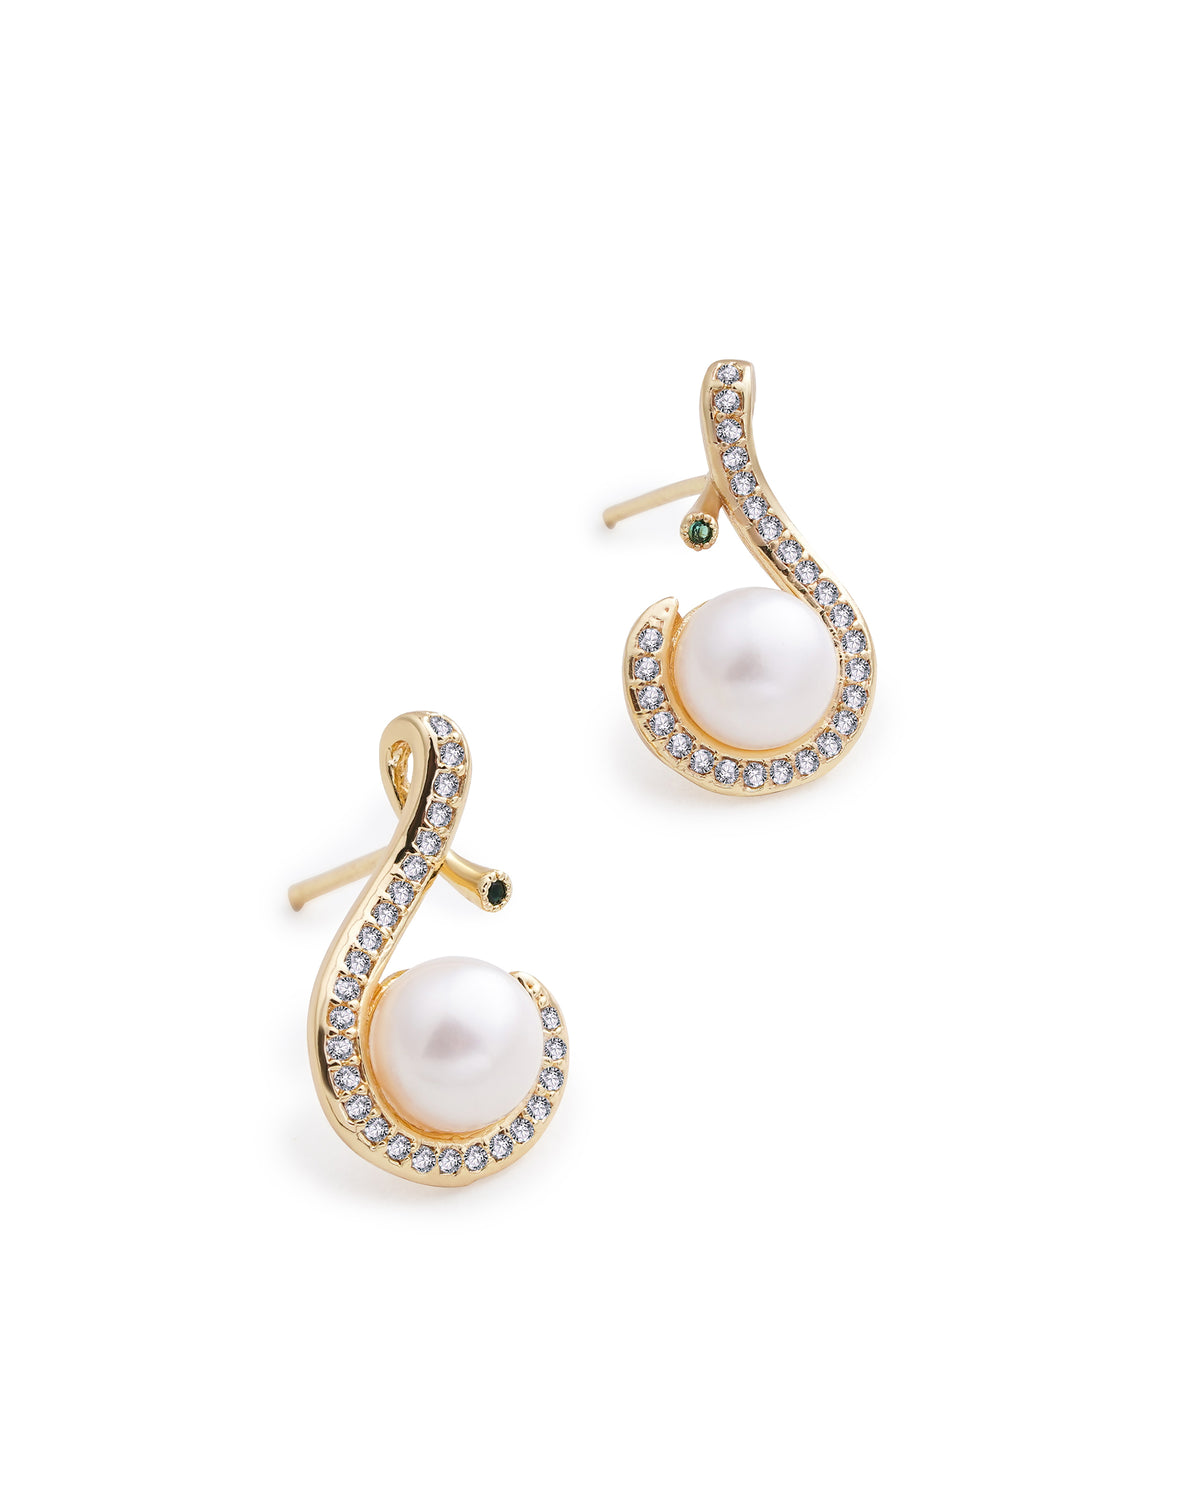 "Sound of Music" Note Design Cultured 7mm Pearl Earrings, Embellished with Crystals